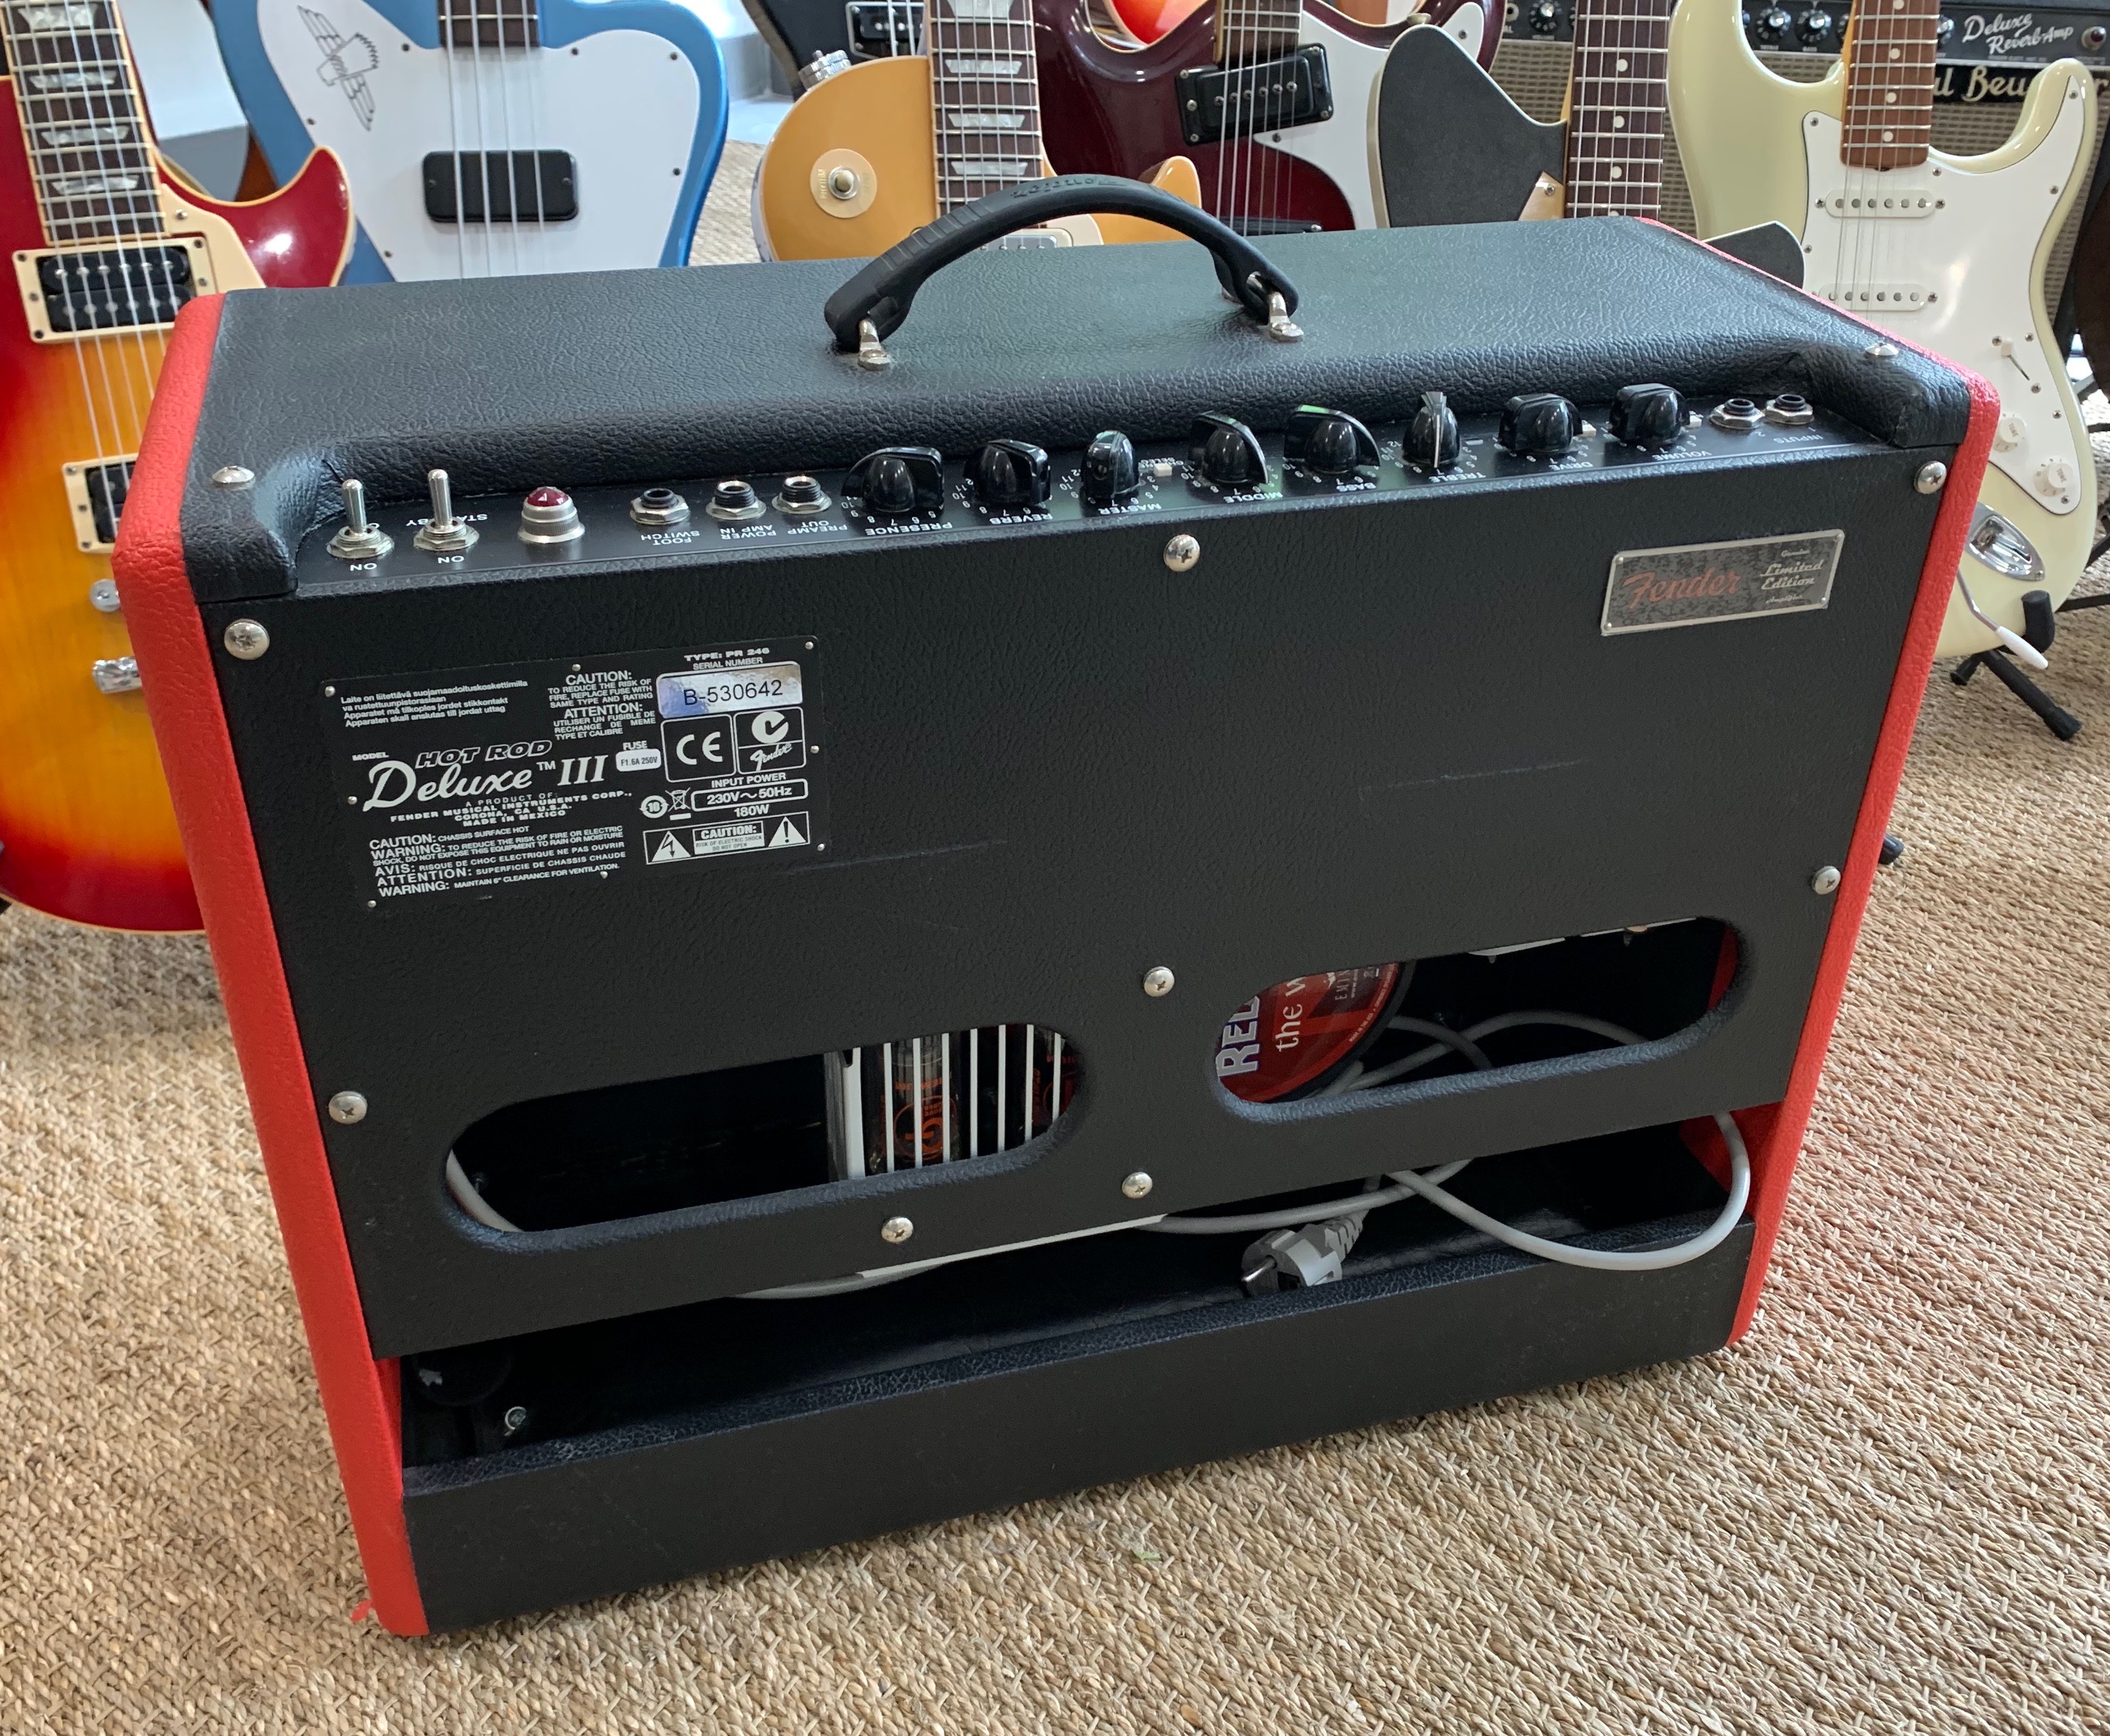 Hot Rod Deluxe III - Red Nova Two-Tone Limited Edition Fender 